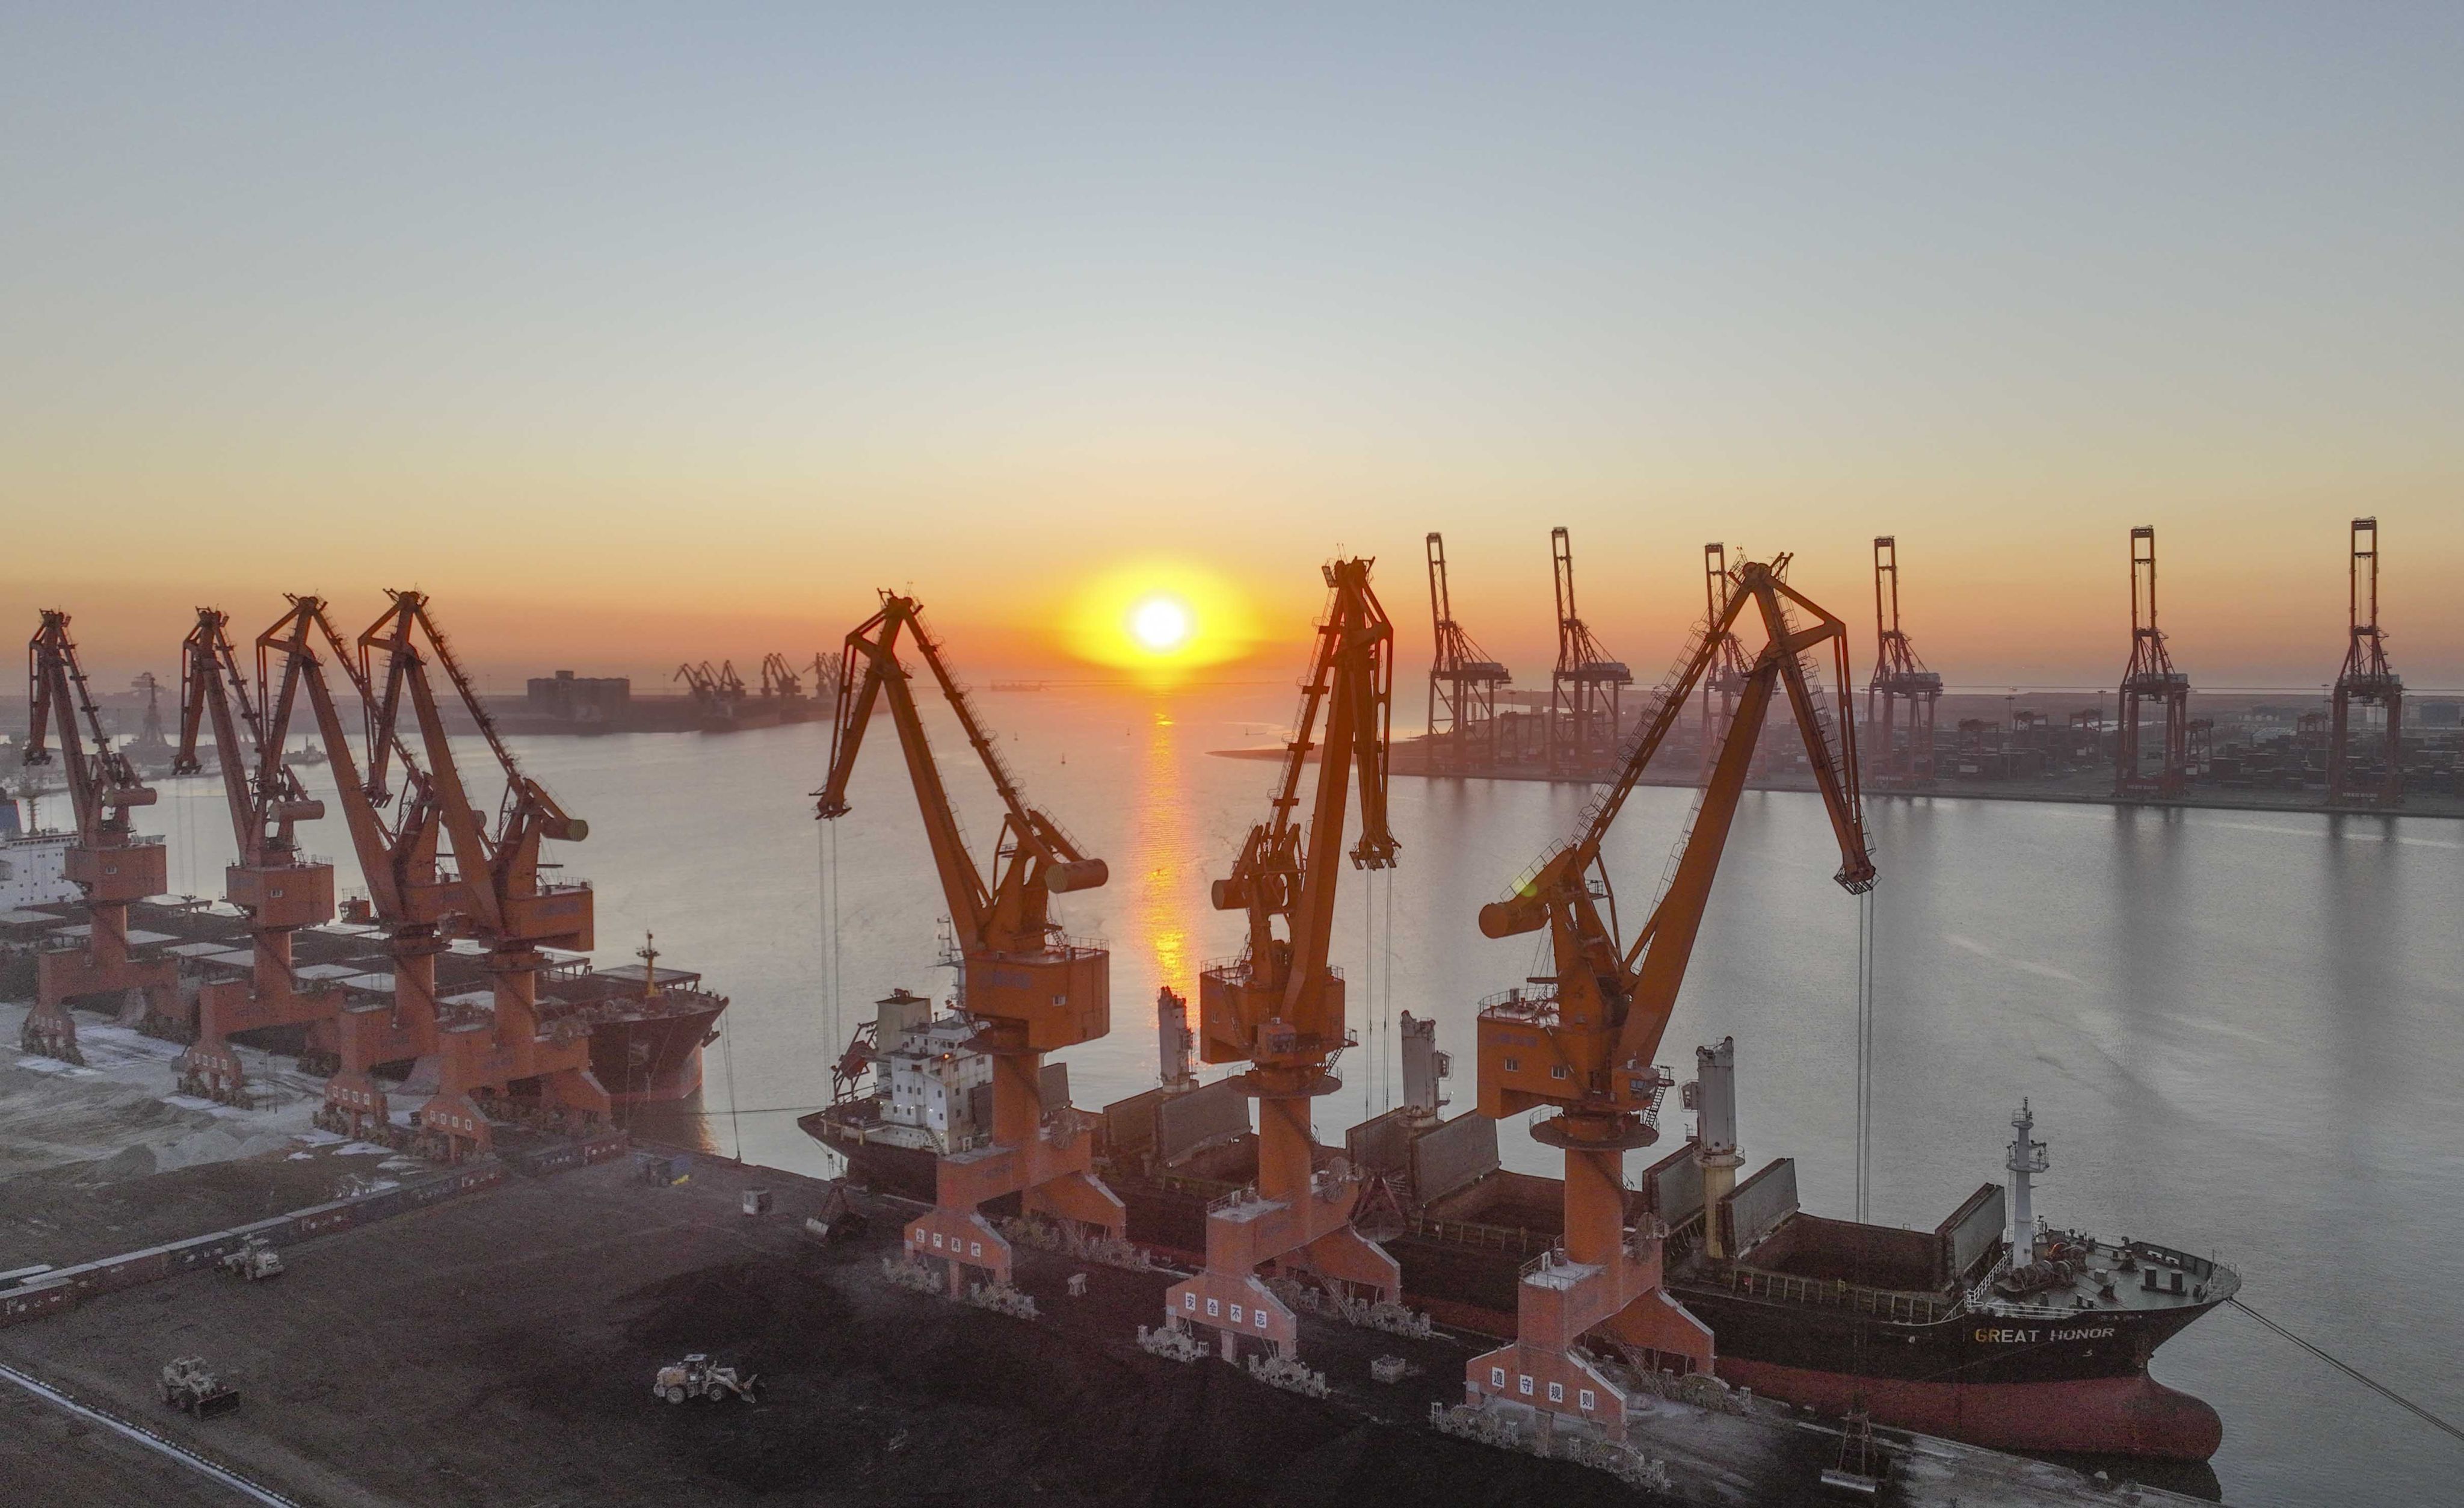 Sunrise at the Jingtang port area at Tangshan Port in northern China’s Hebei province on January 17. Given the grim global outlook, exports cannot be expected to be a major driver of China’s growth this year, despite making an important contribution in 2022. Photo: Xinhua